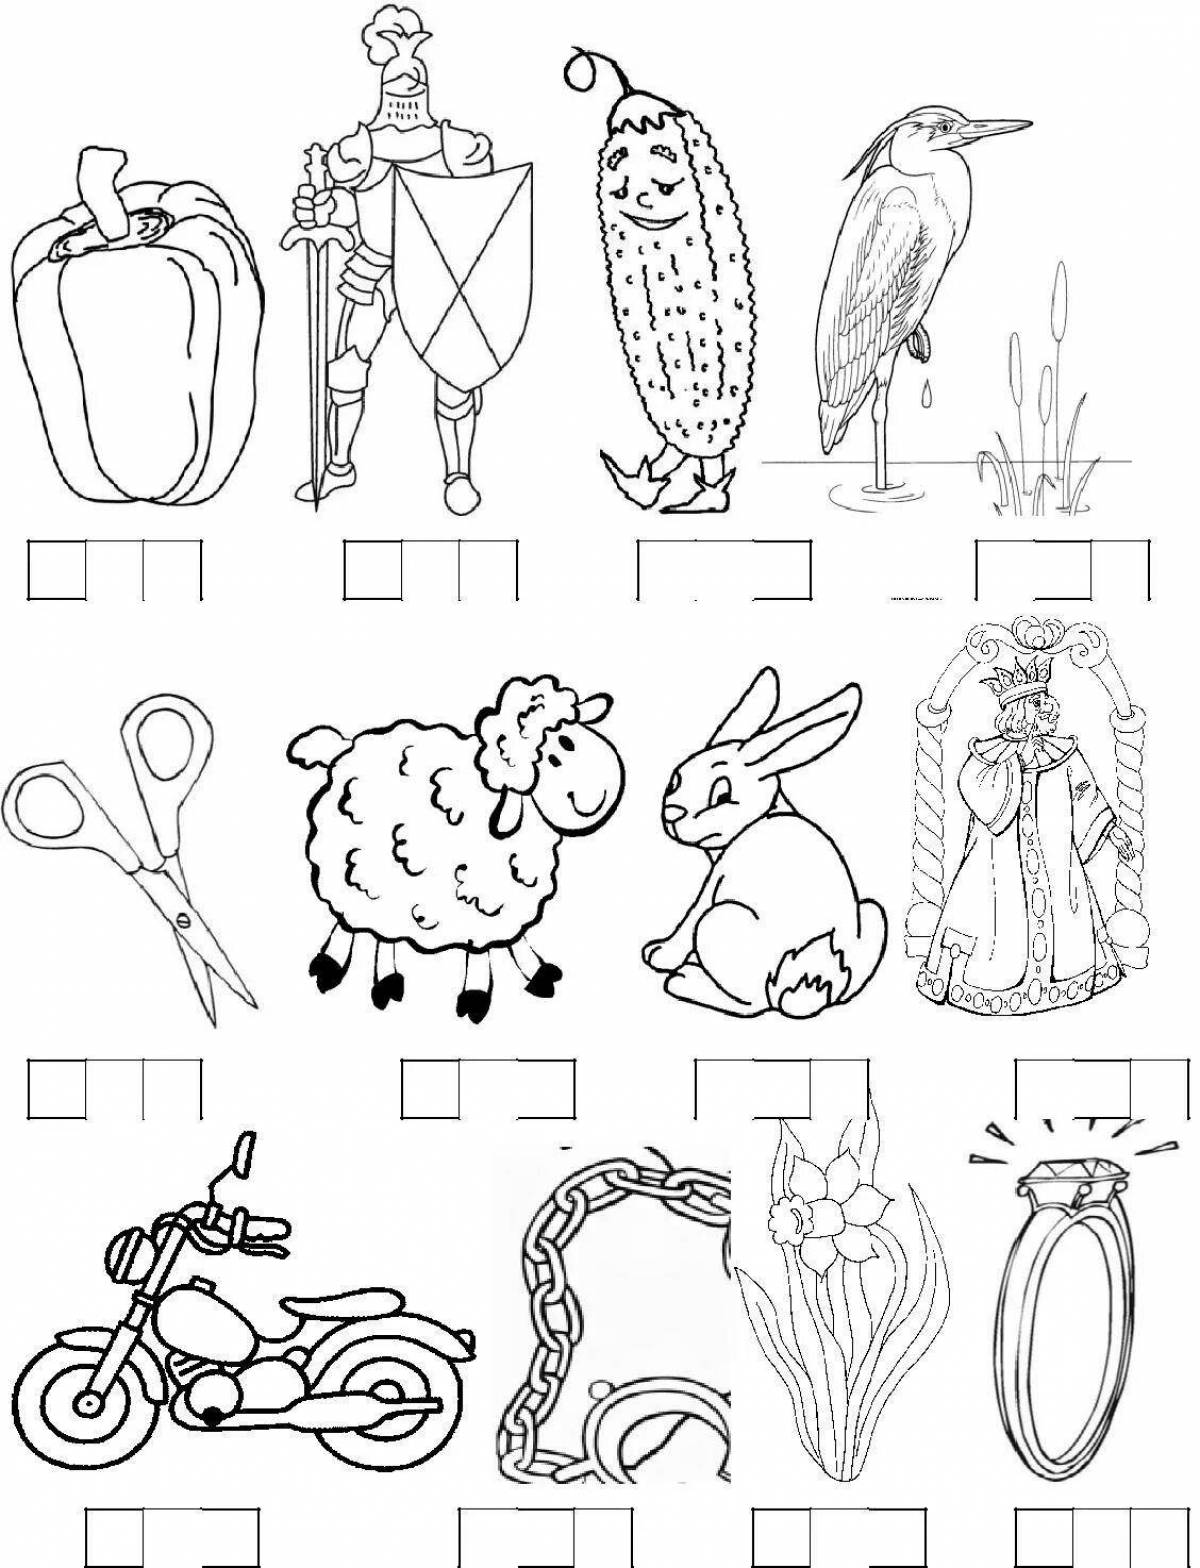 Colorful sound and letter coloring page